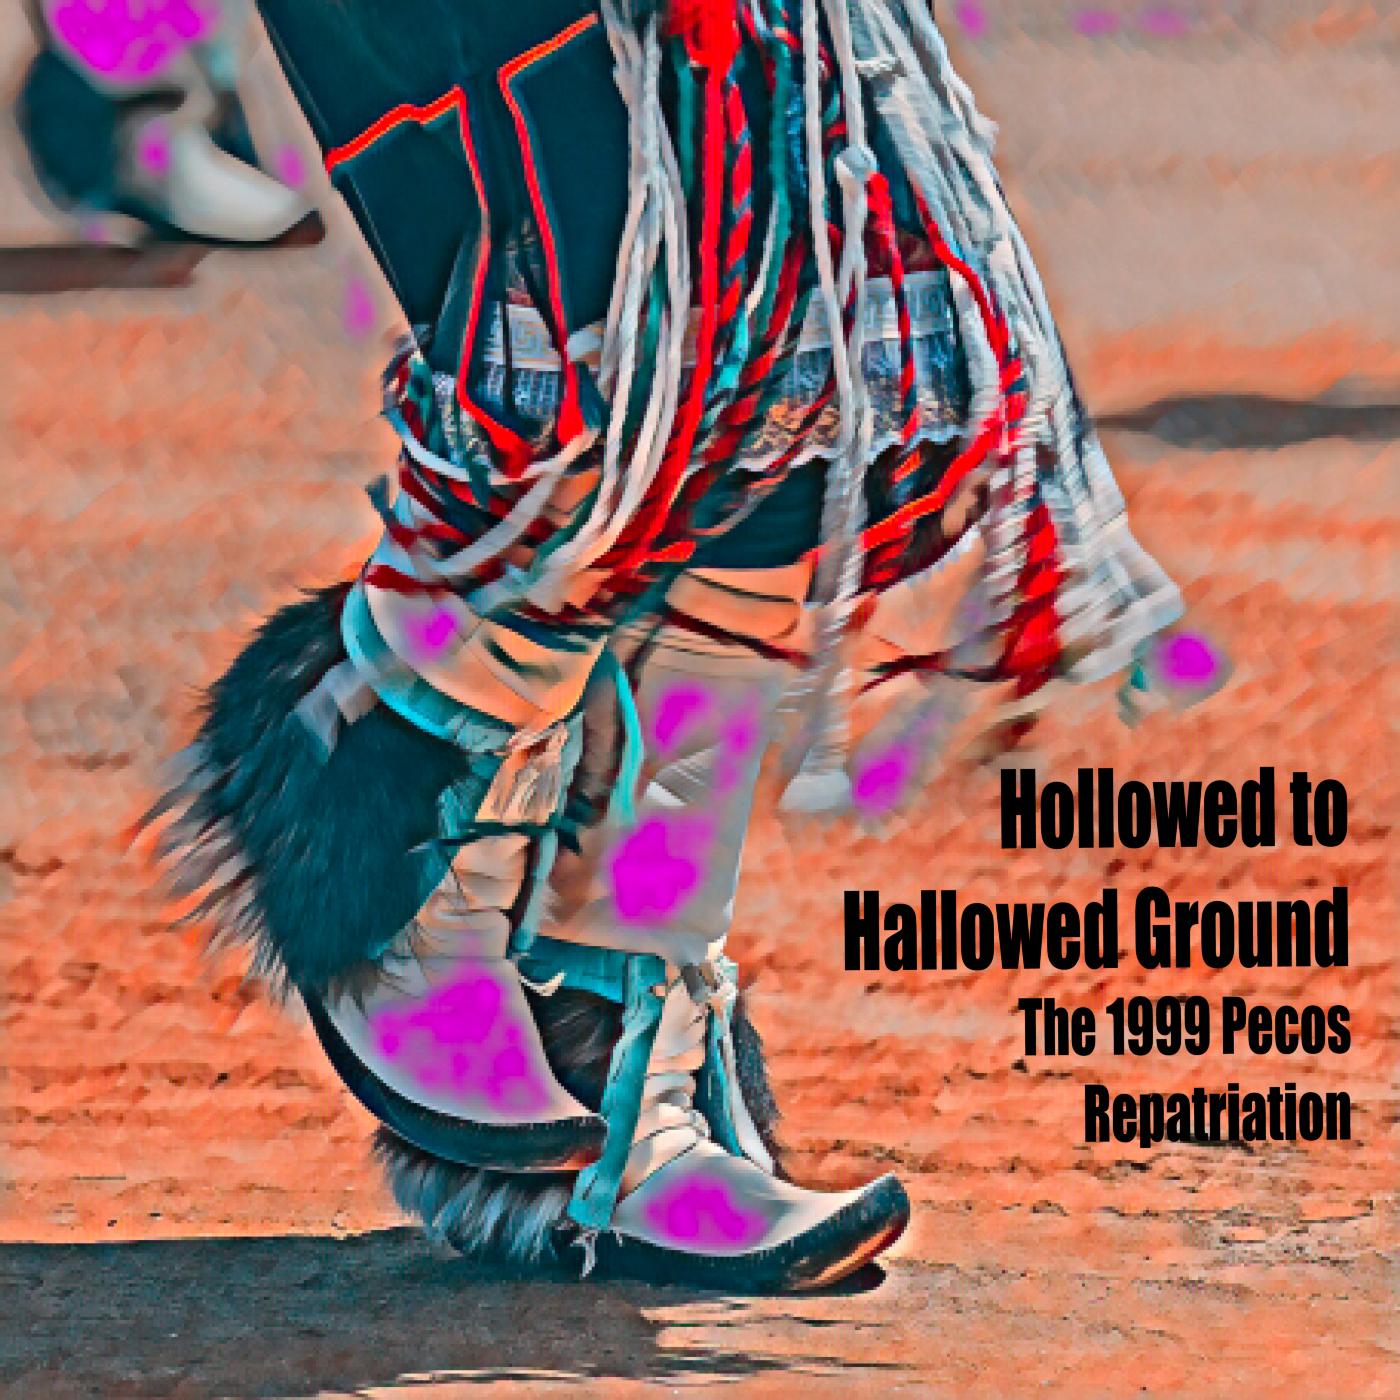 Stylized photo image of a person's dancing moccasin feet with tassels from dress bouncing.